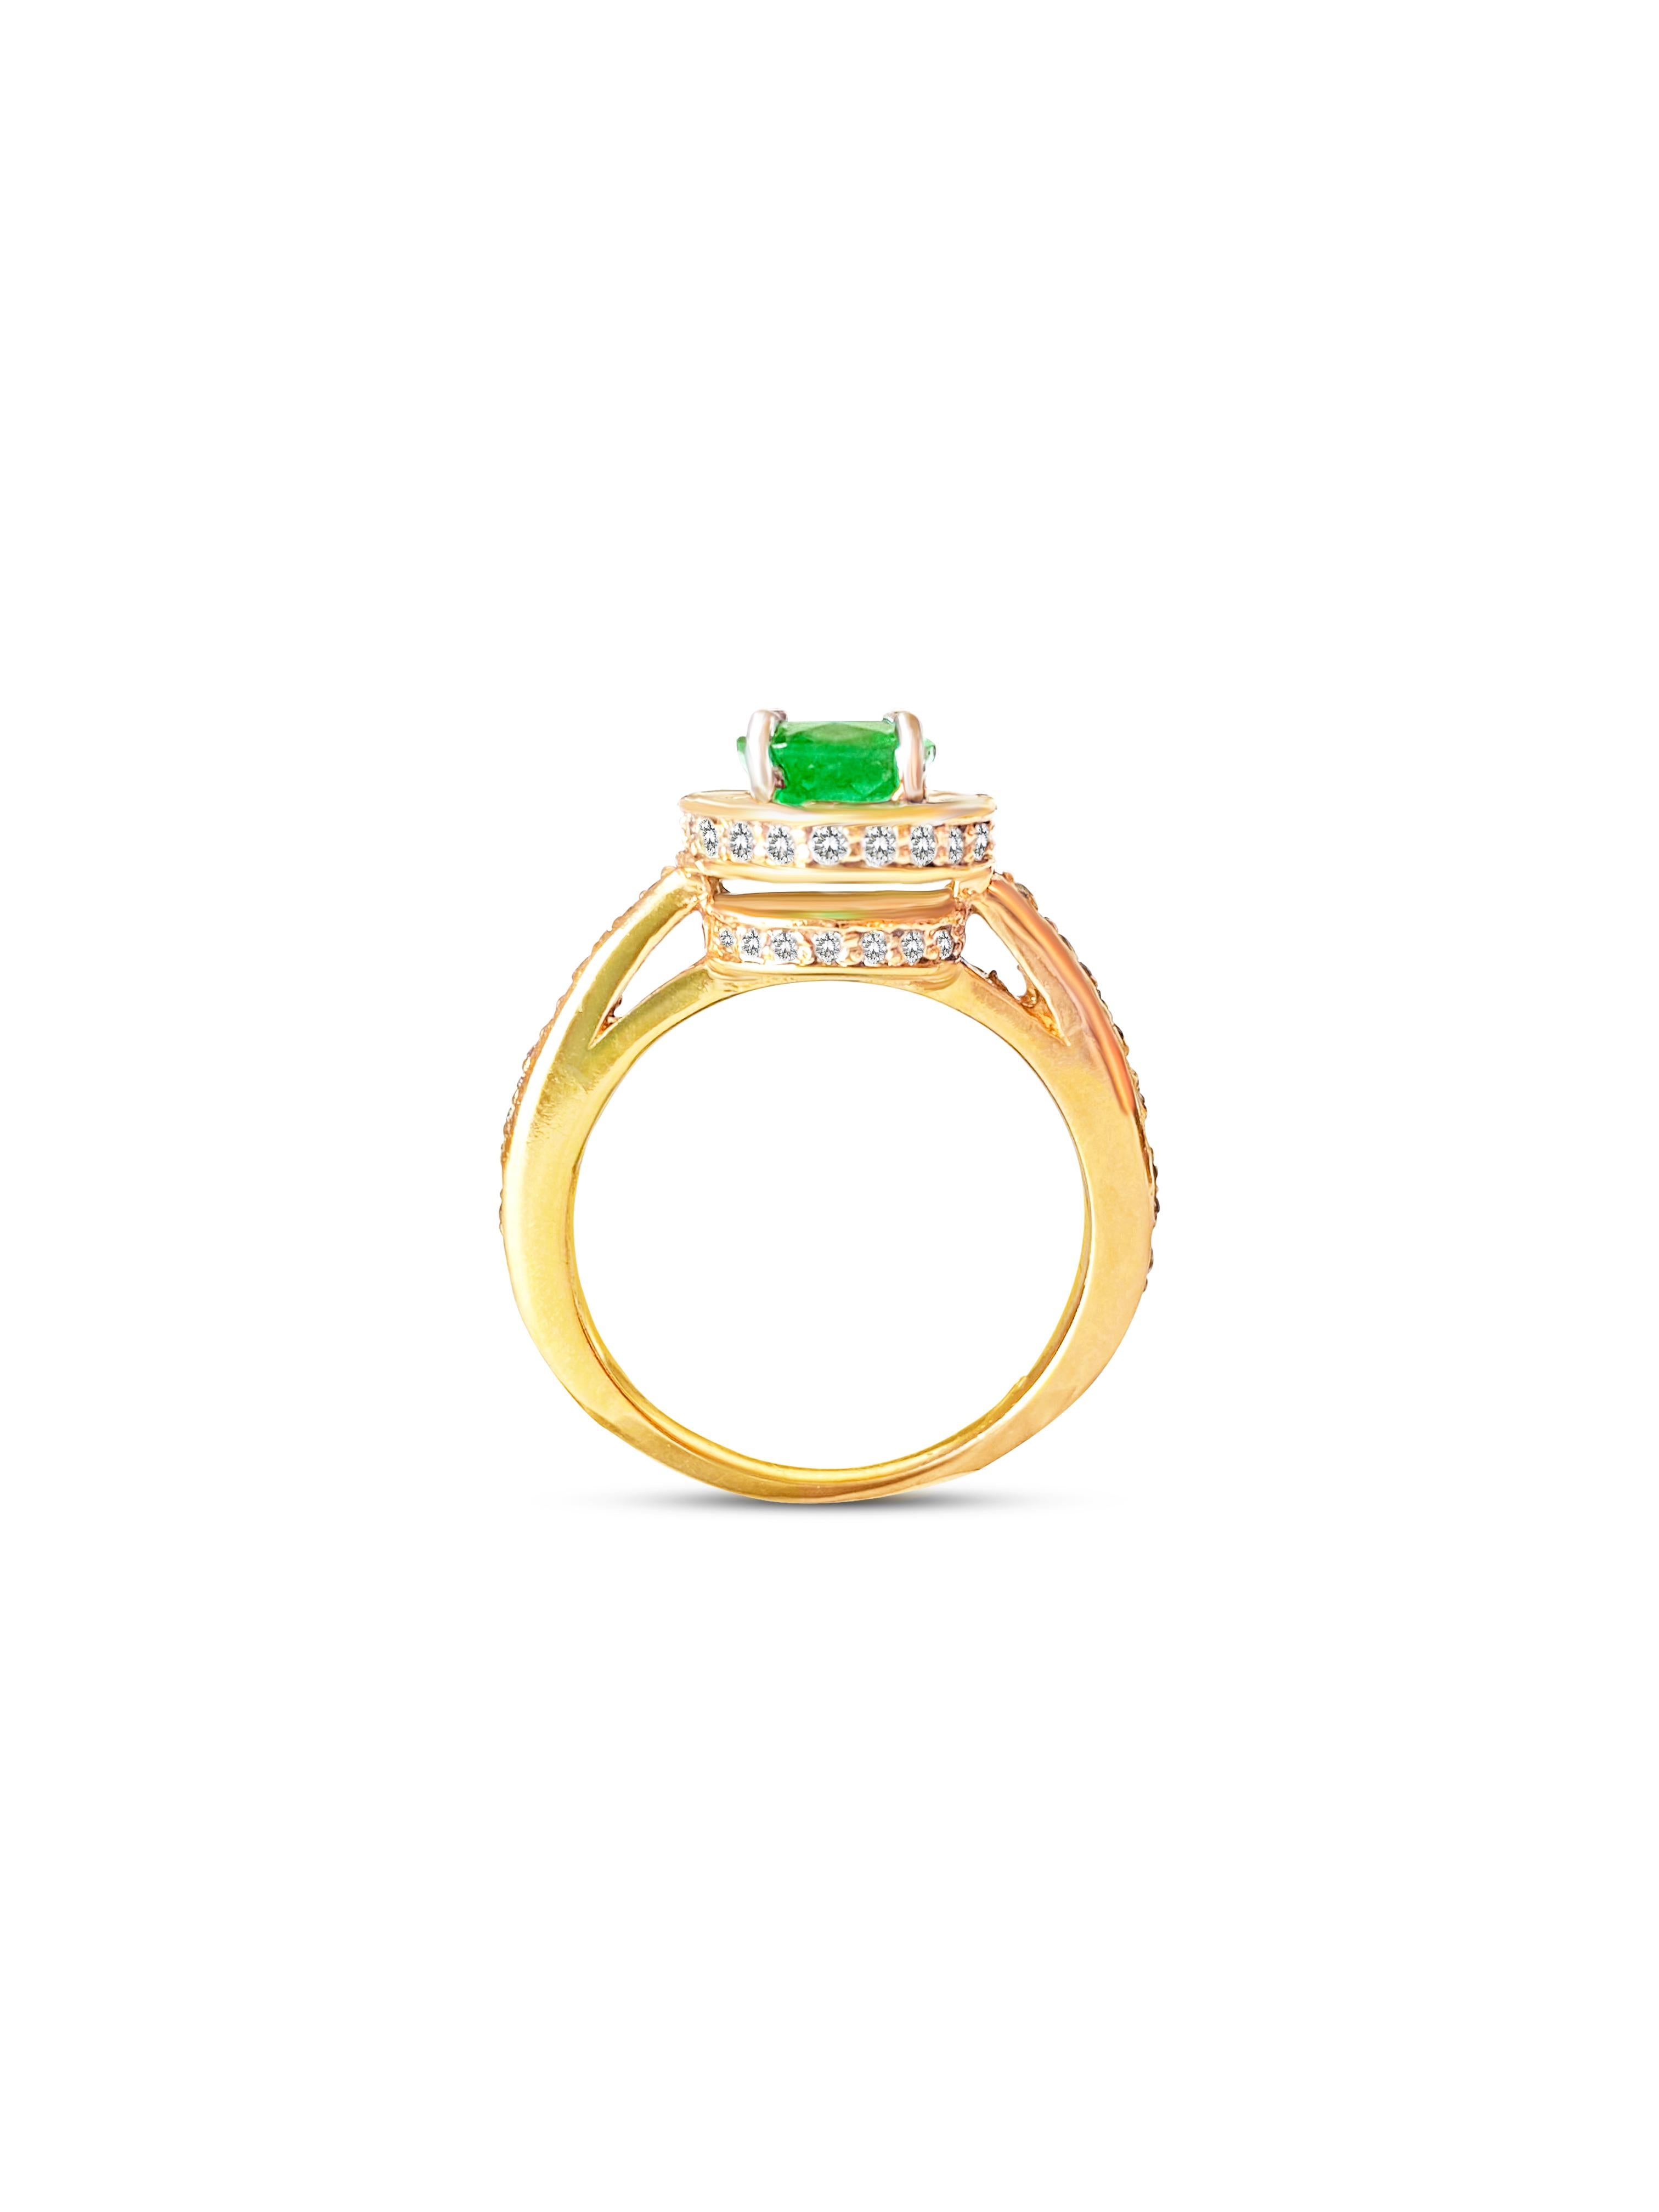 Emerald Cut 14k Gold Colombian Emerald And Diamond Engagement Ring For Sale